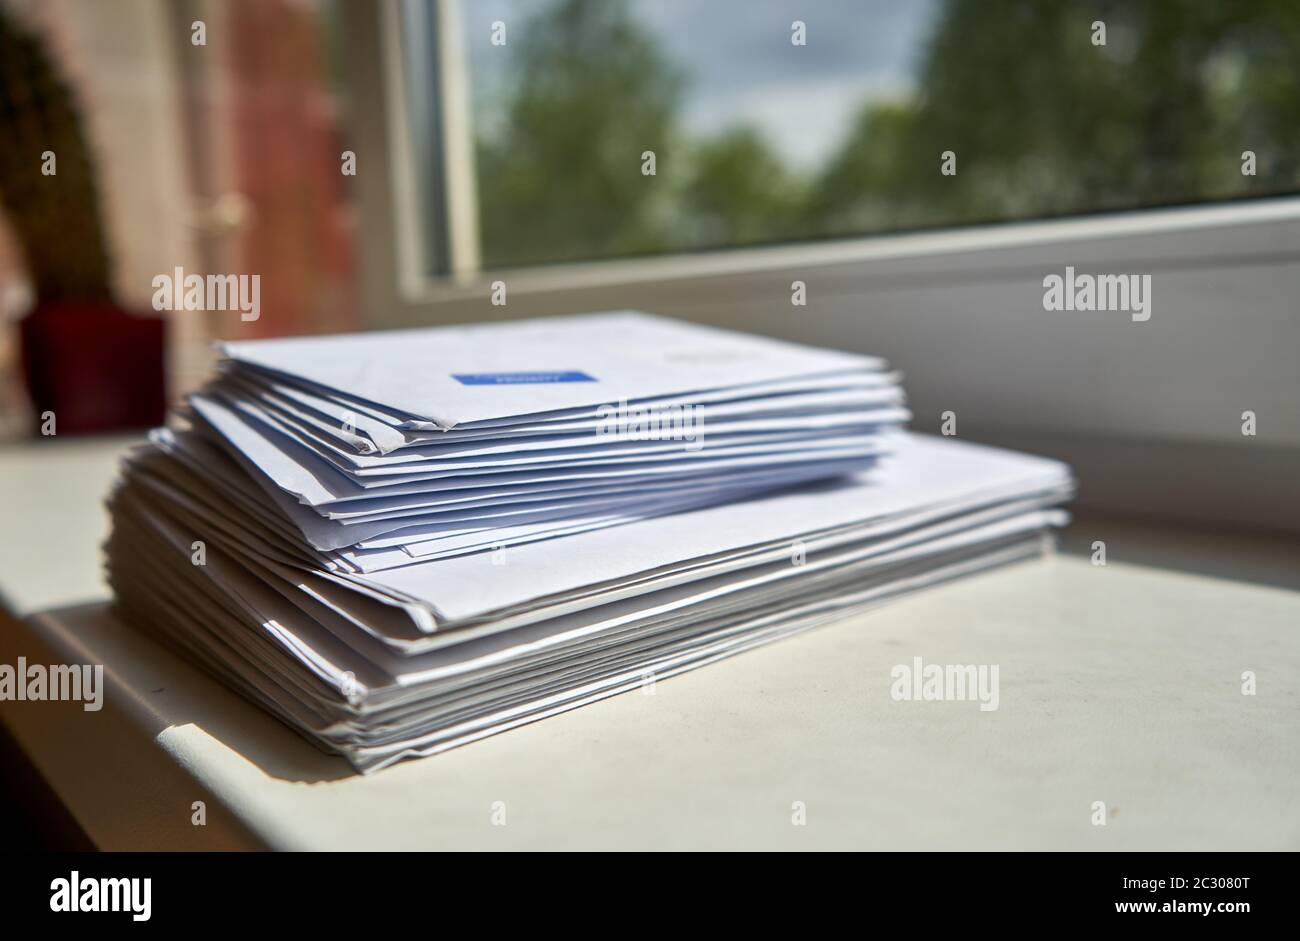 Pile of envelopes placed near the window at home Stock Photo